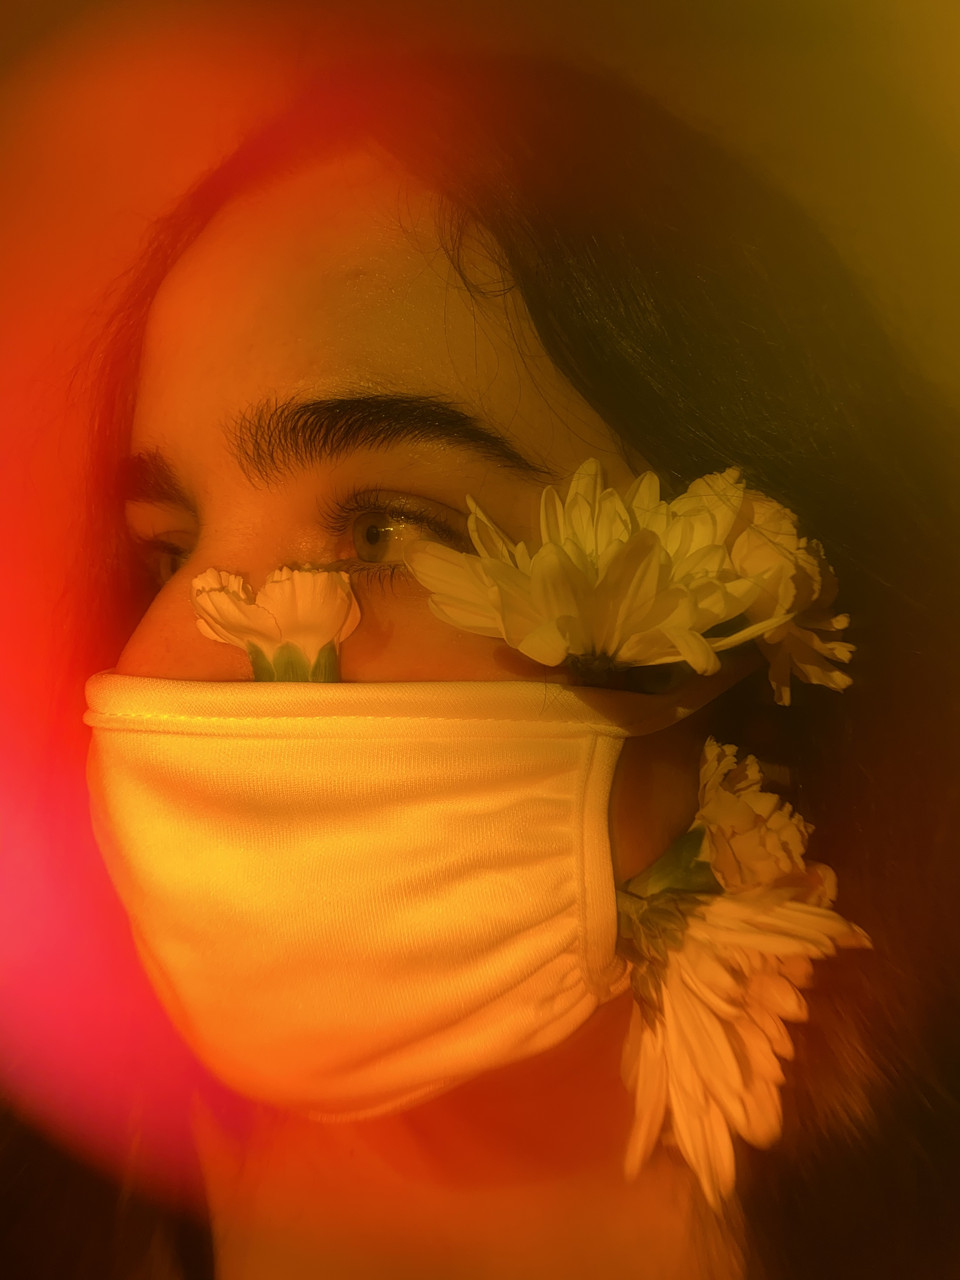 An orange-tinted close-up photograph of a person wearing a mask with yellow flowers tucked inside